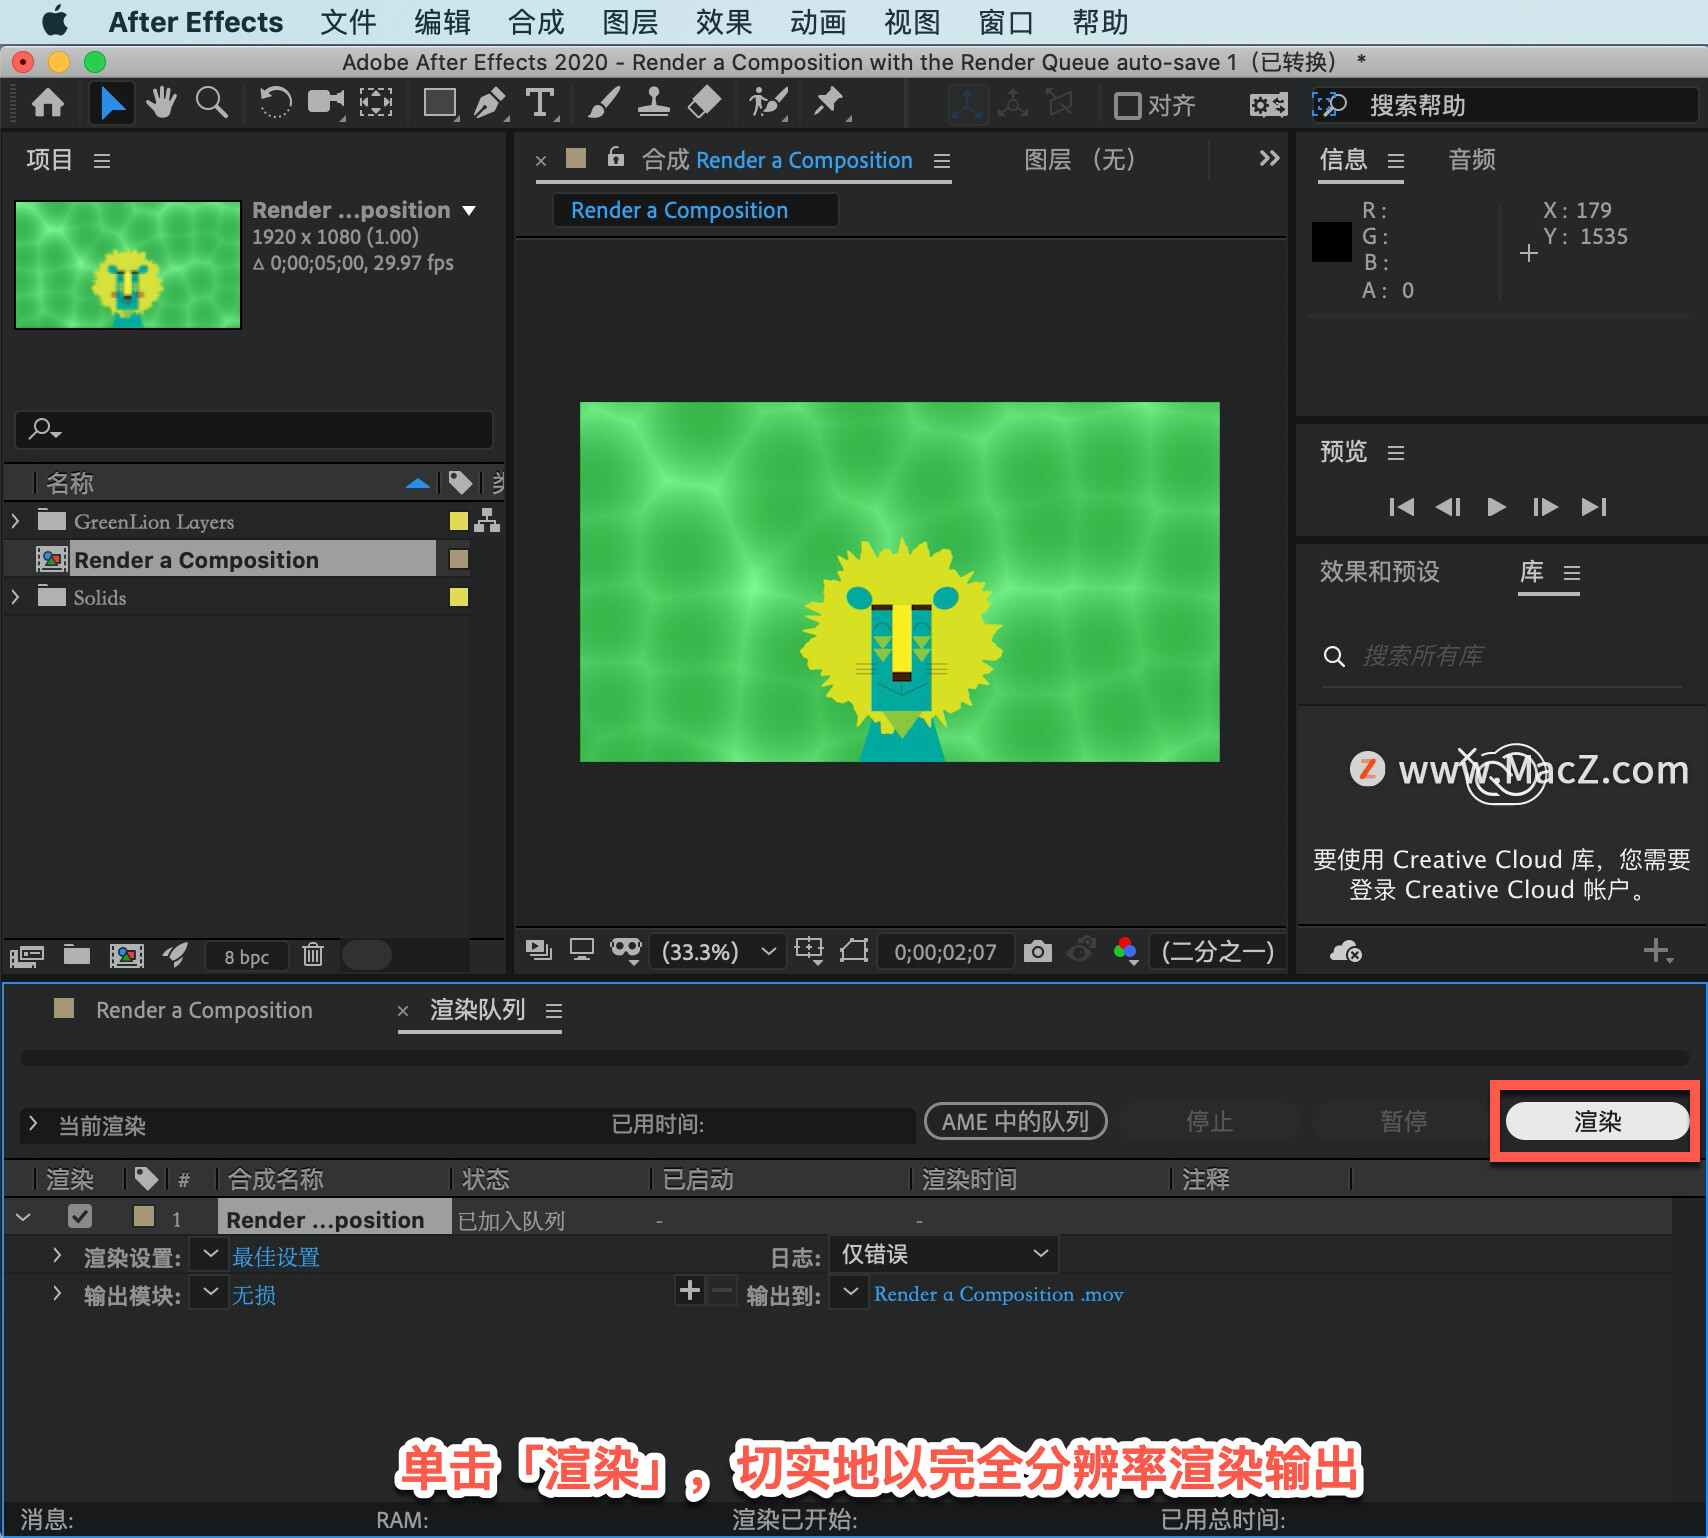 After Effects 教程「59」，如何在 After Effects 中使用渲染队列？